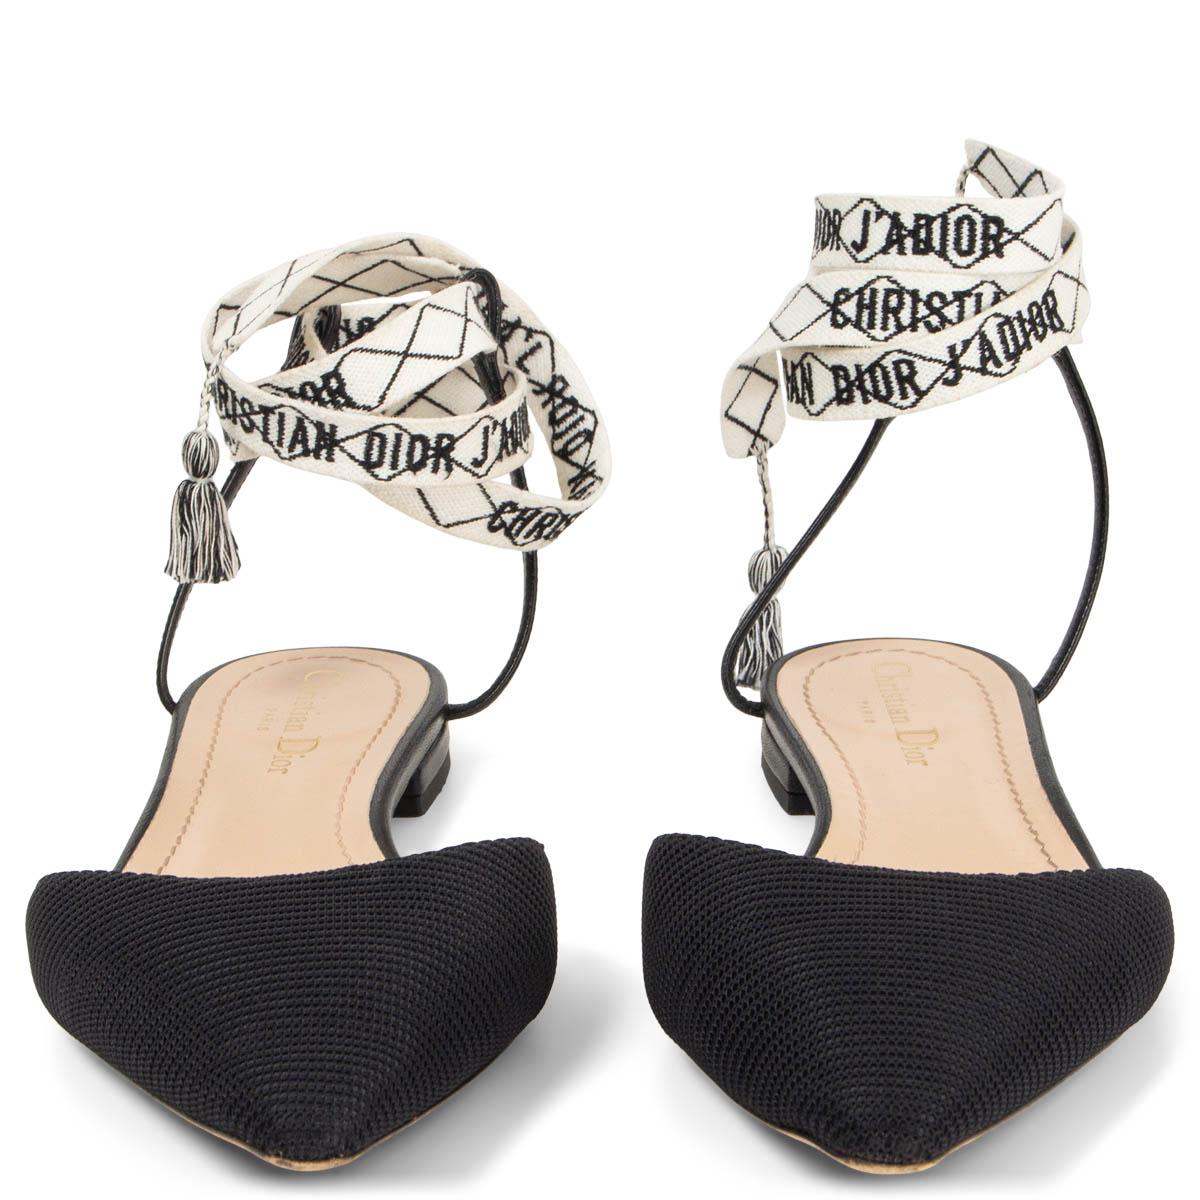 100% authentic Christian Dior J'Adior pointed-toe ankle wrap flats in black mesh and satin. Straps and lining in black and nude leather. They come with an exchangeable black and white J'Adior embroidered wrap around ribbon and an additional one in